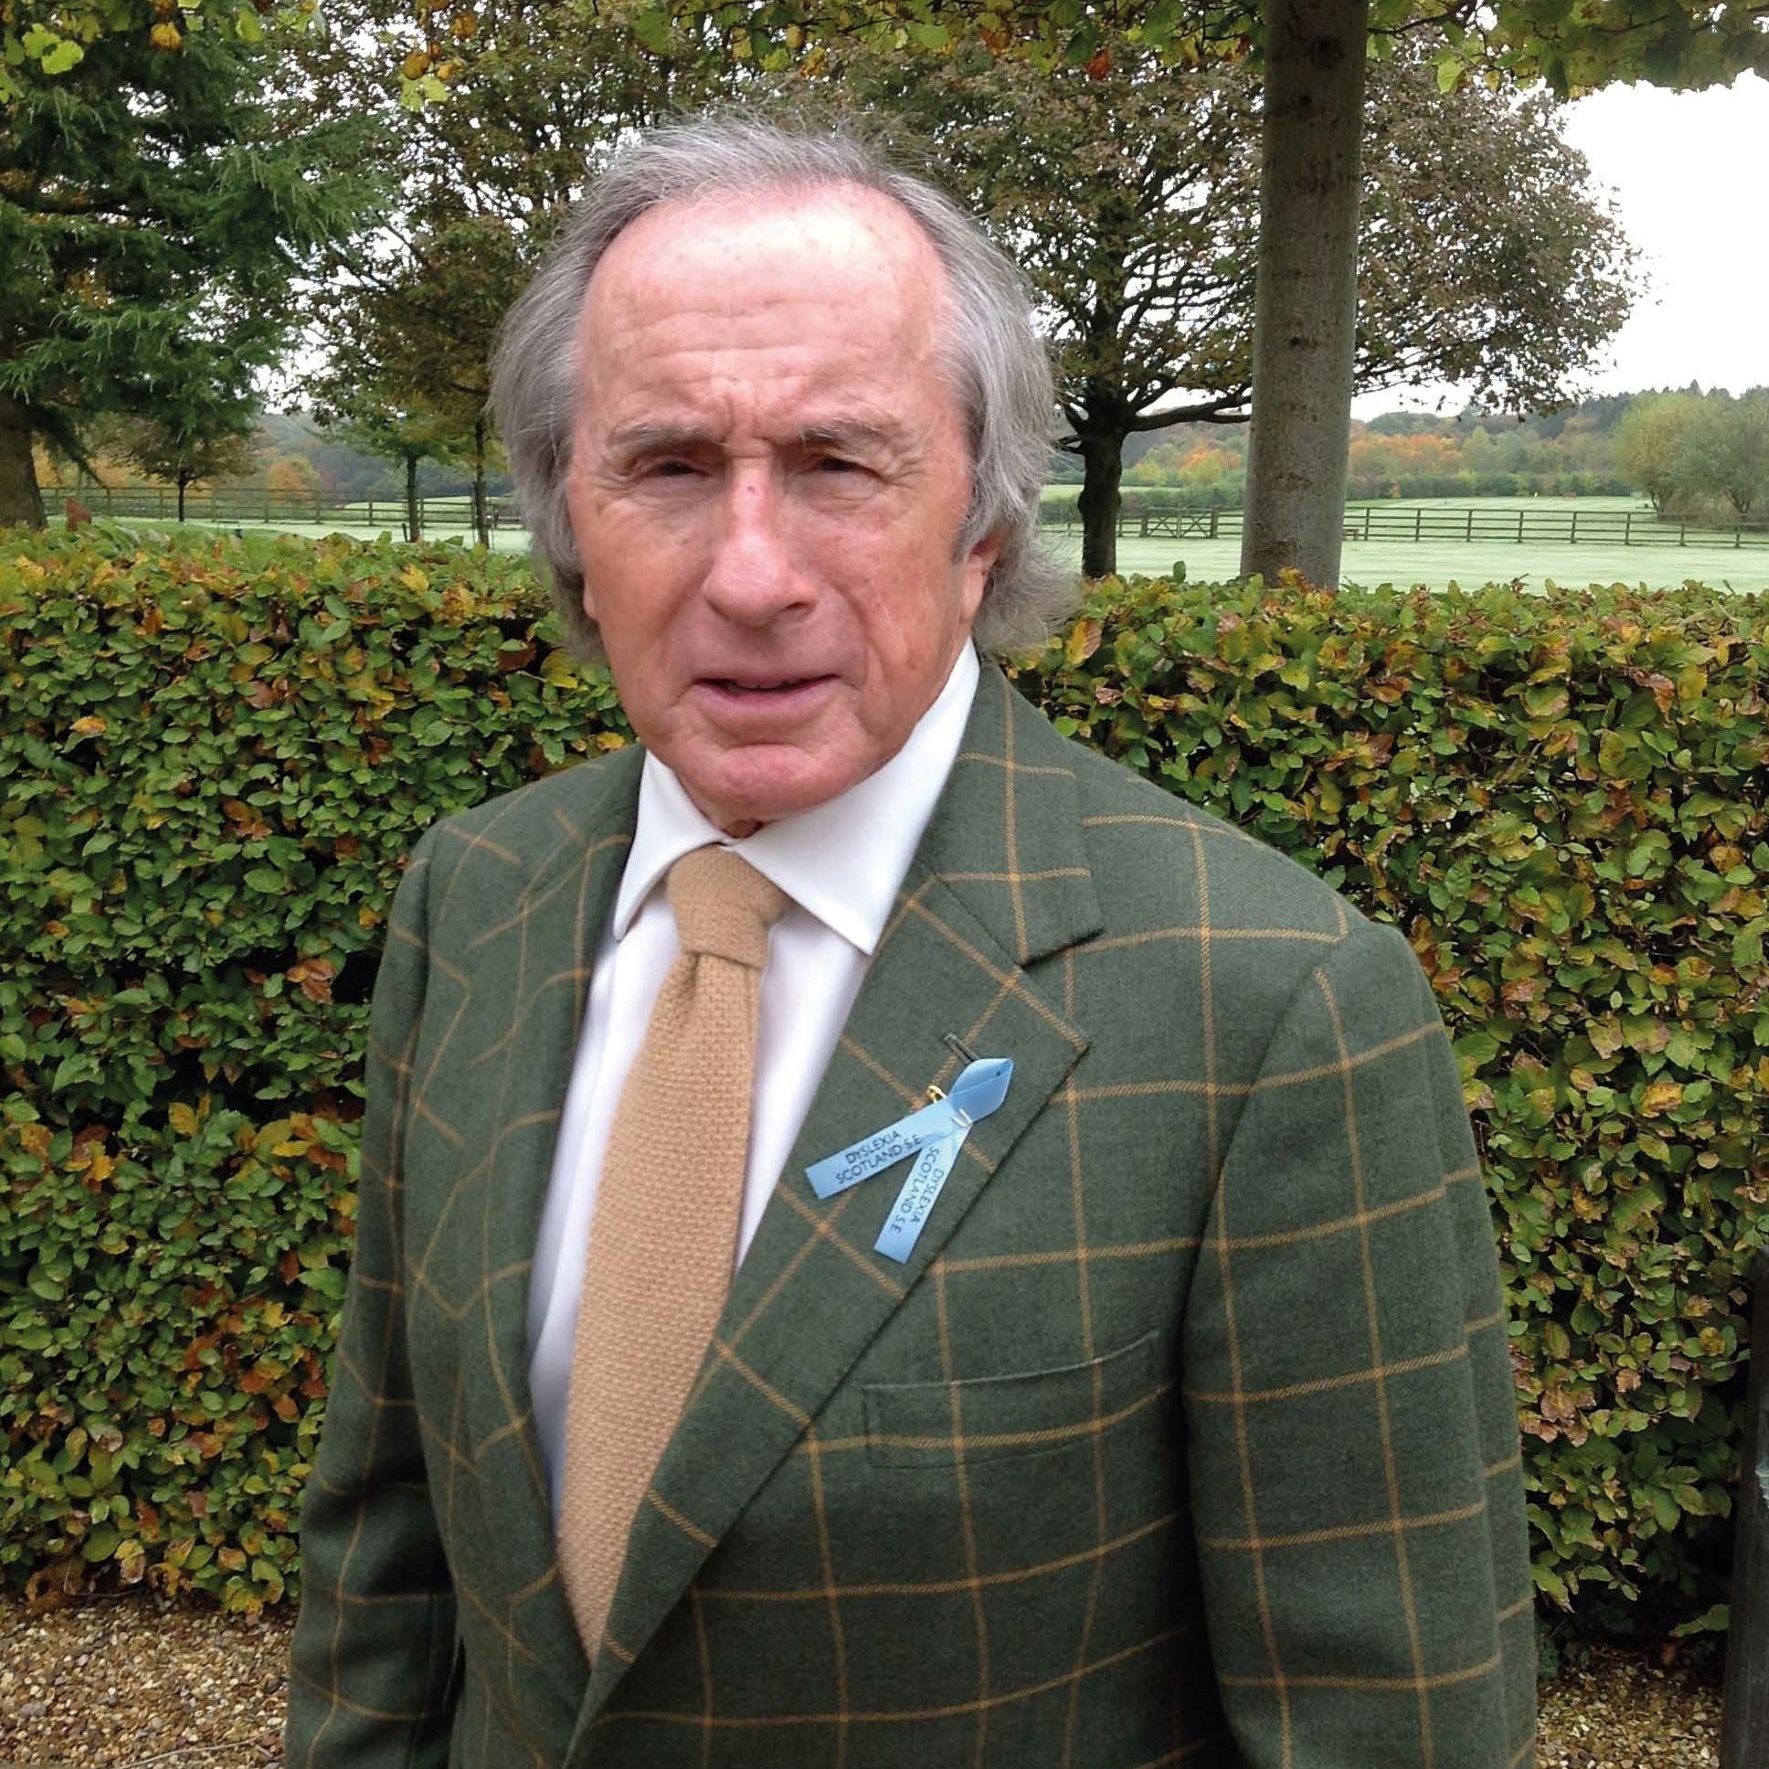 Sir Jackie Stewart in a green tweed suit with a blue ribbon on the lapel.